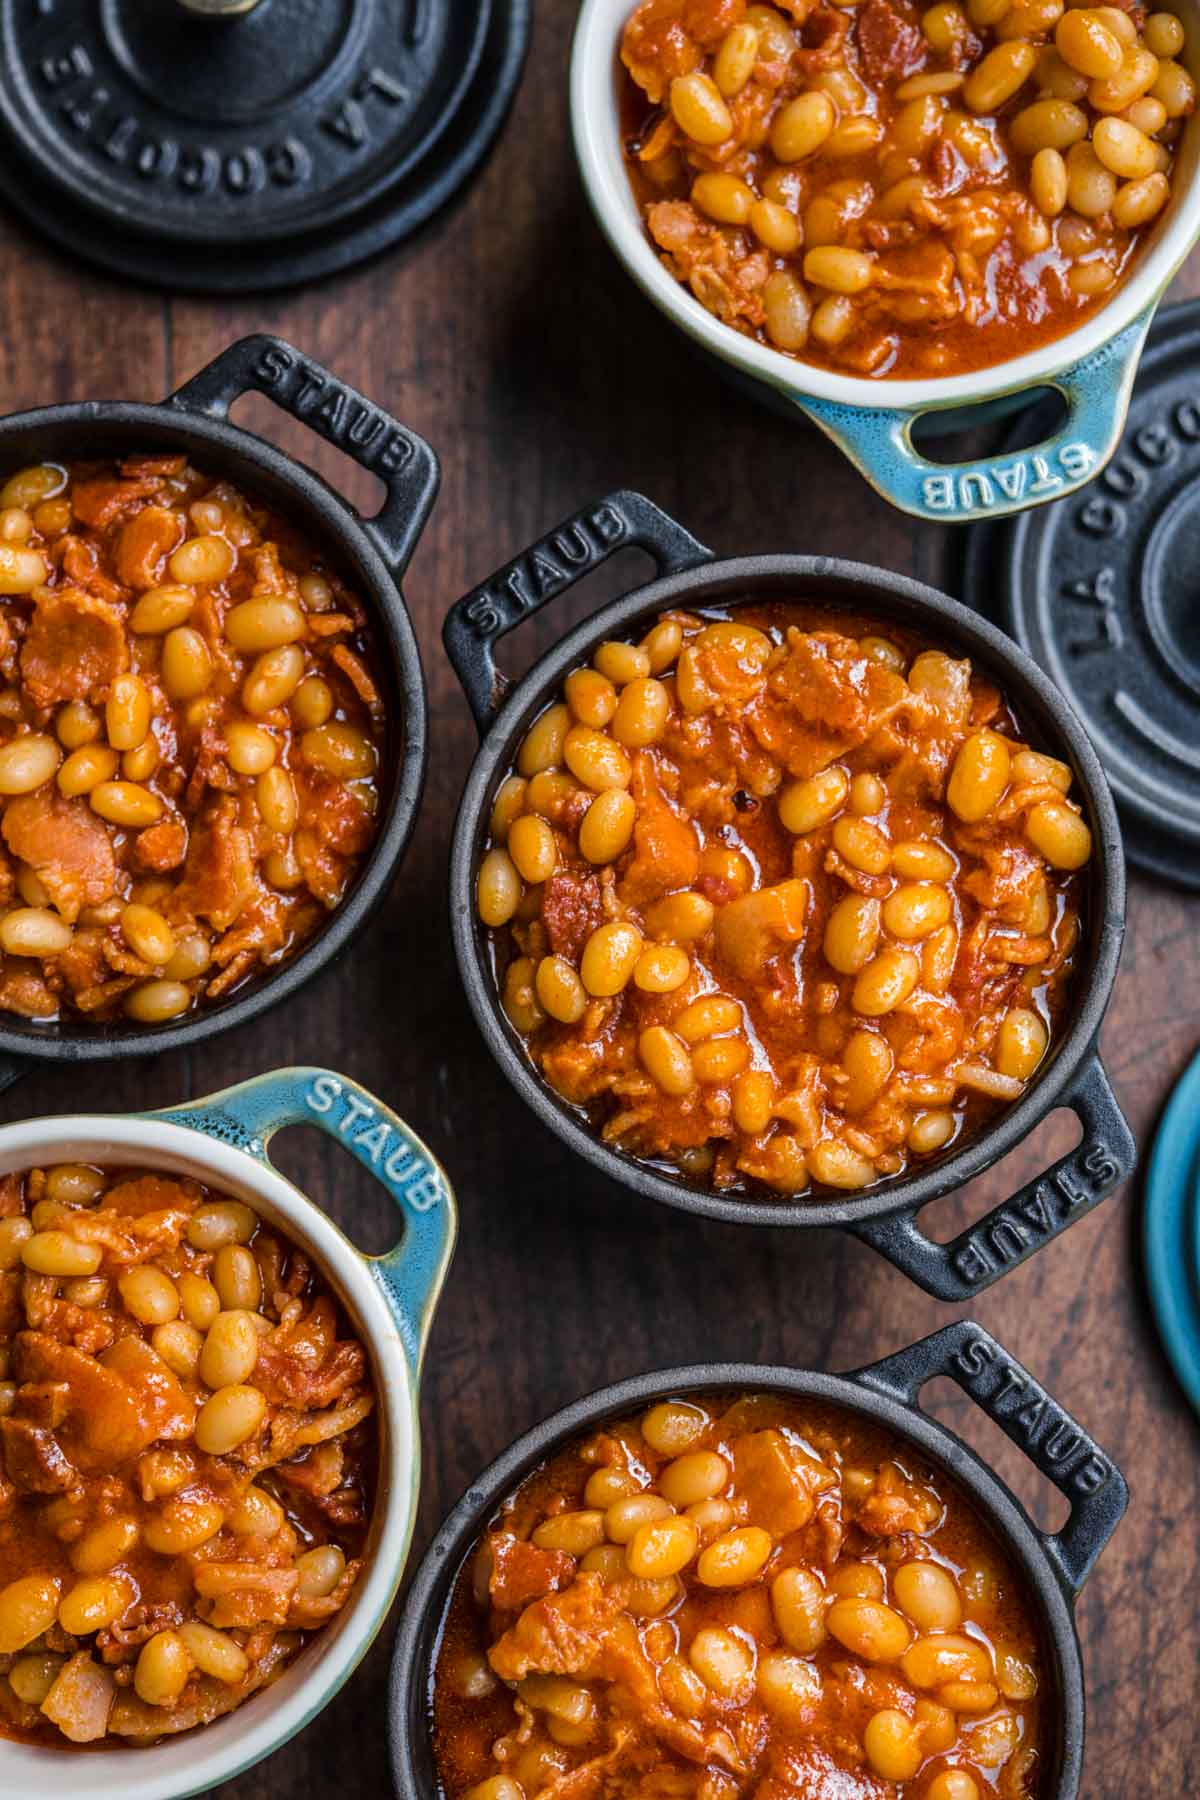 Homemade Pork and Beans with bacon and sauce in small cast iron pots for serving